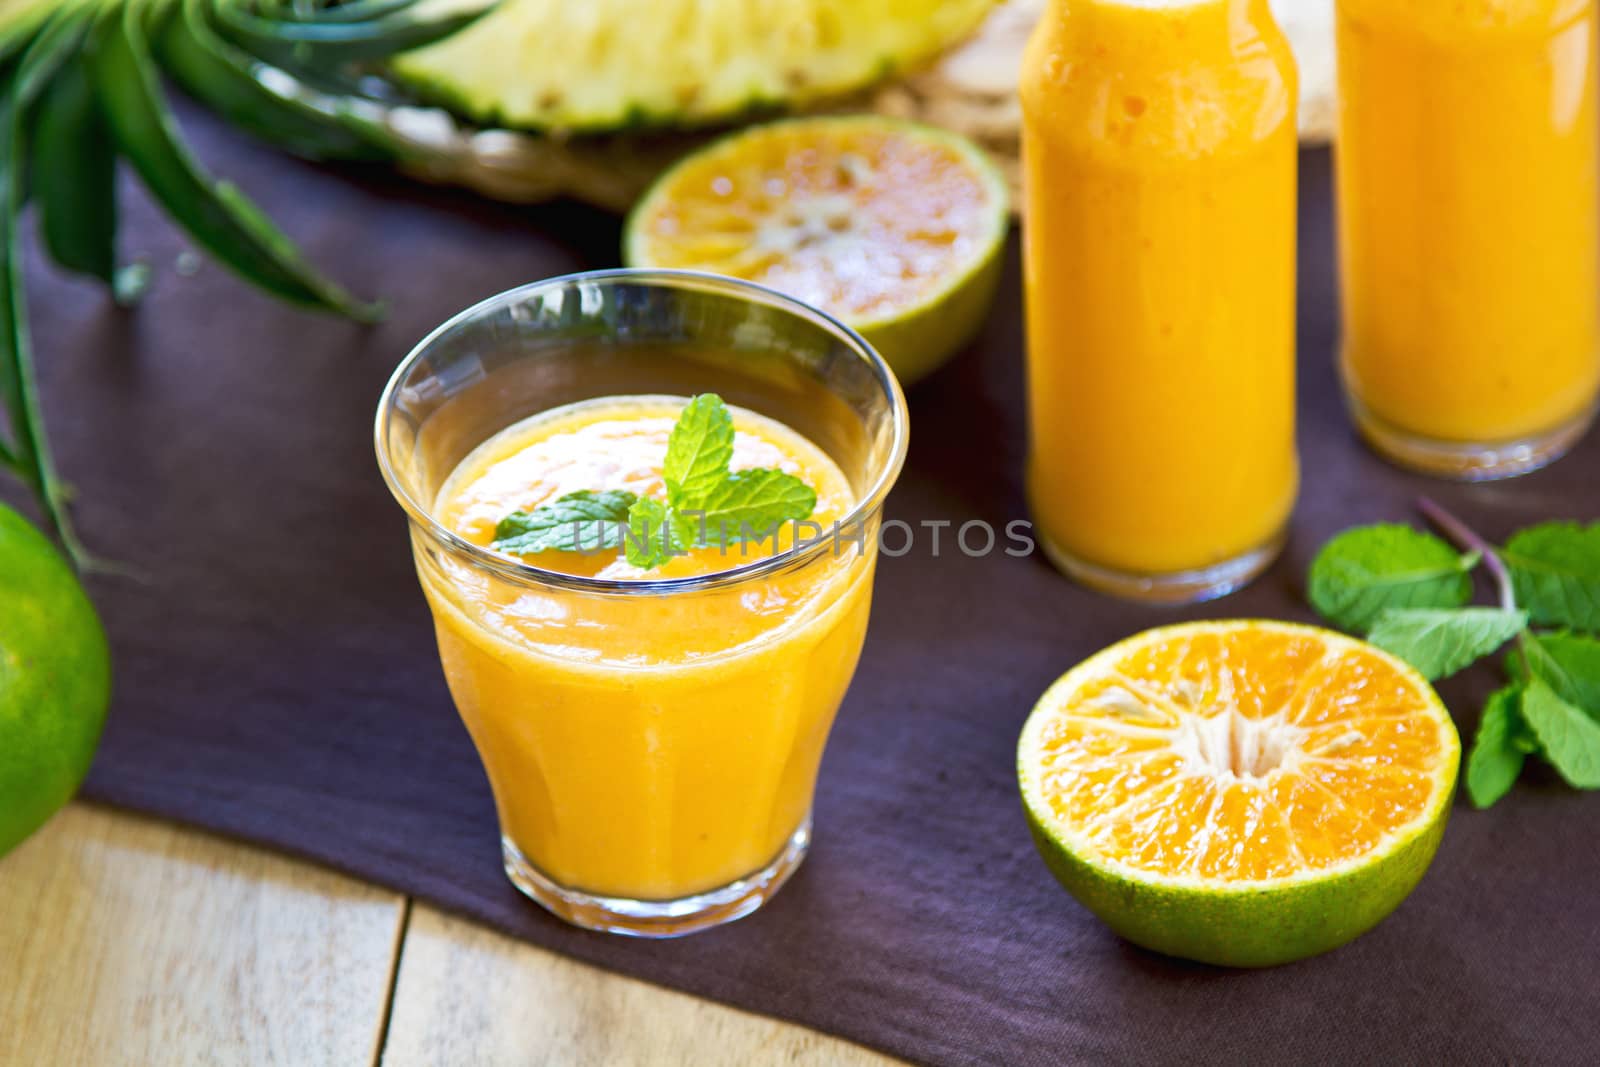 Pineapple with Orange and Mango smoothie by vanillaechoes